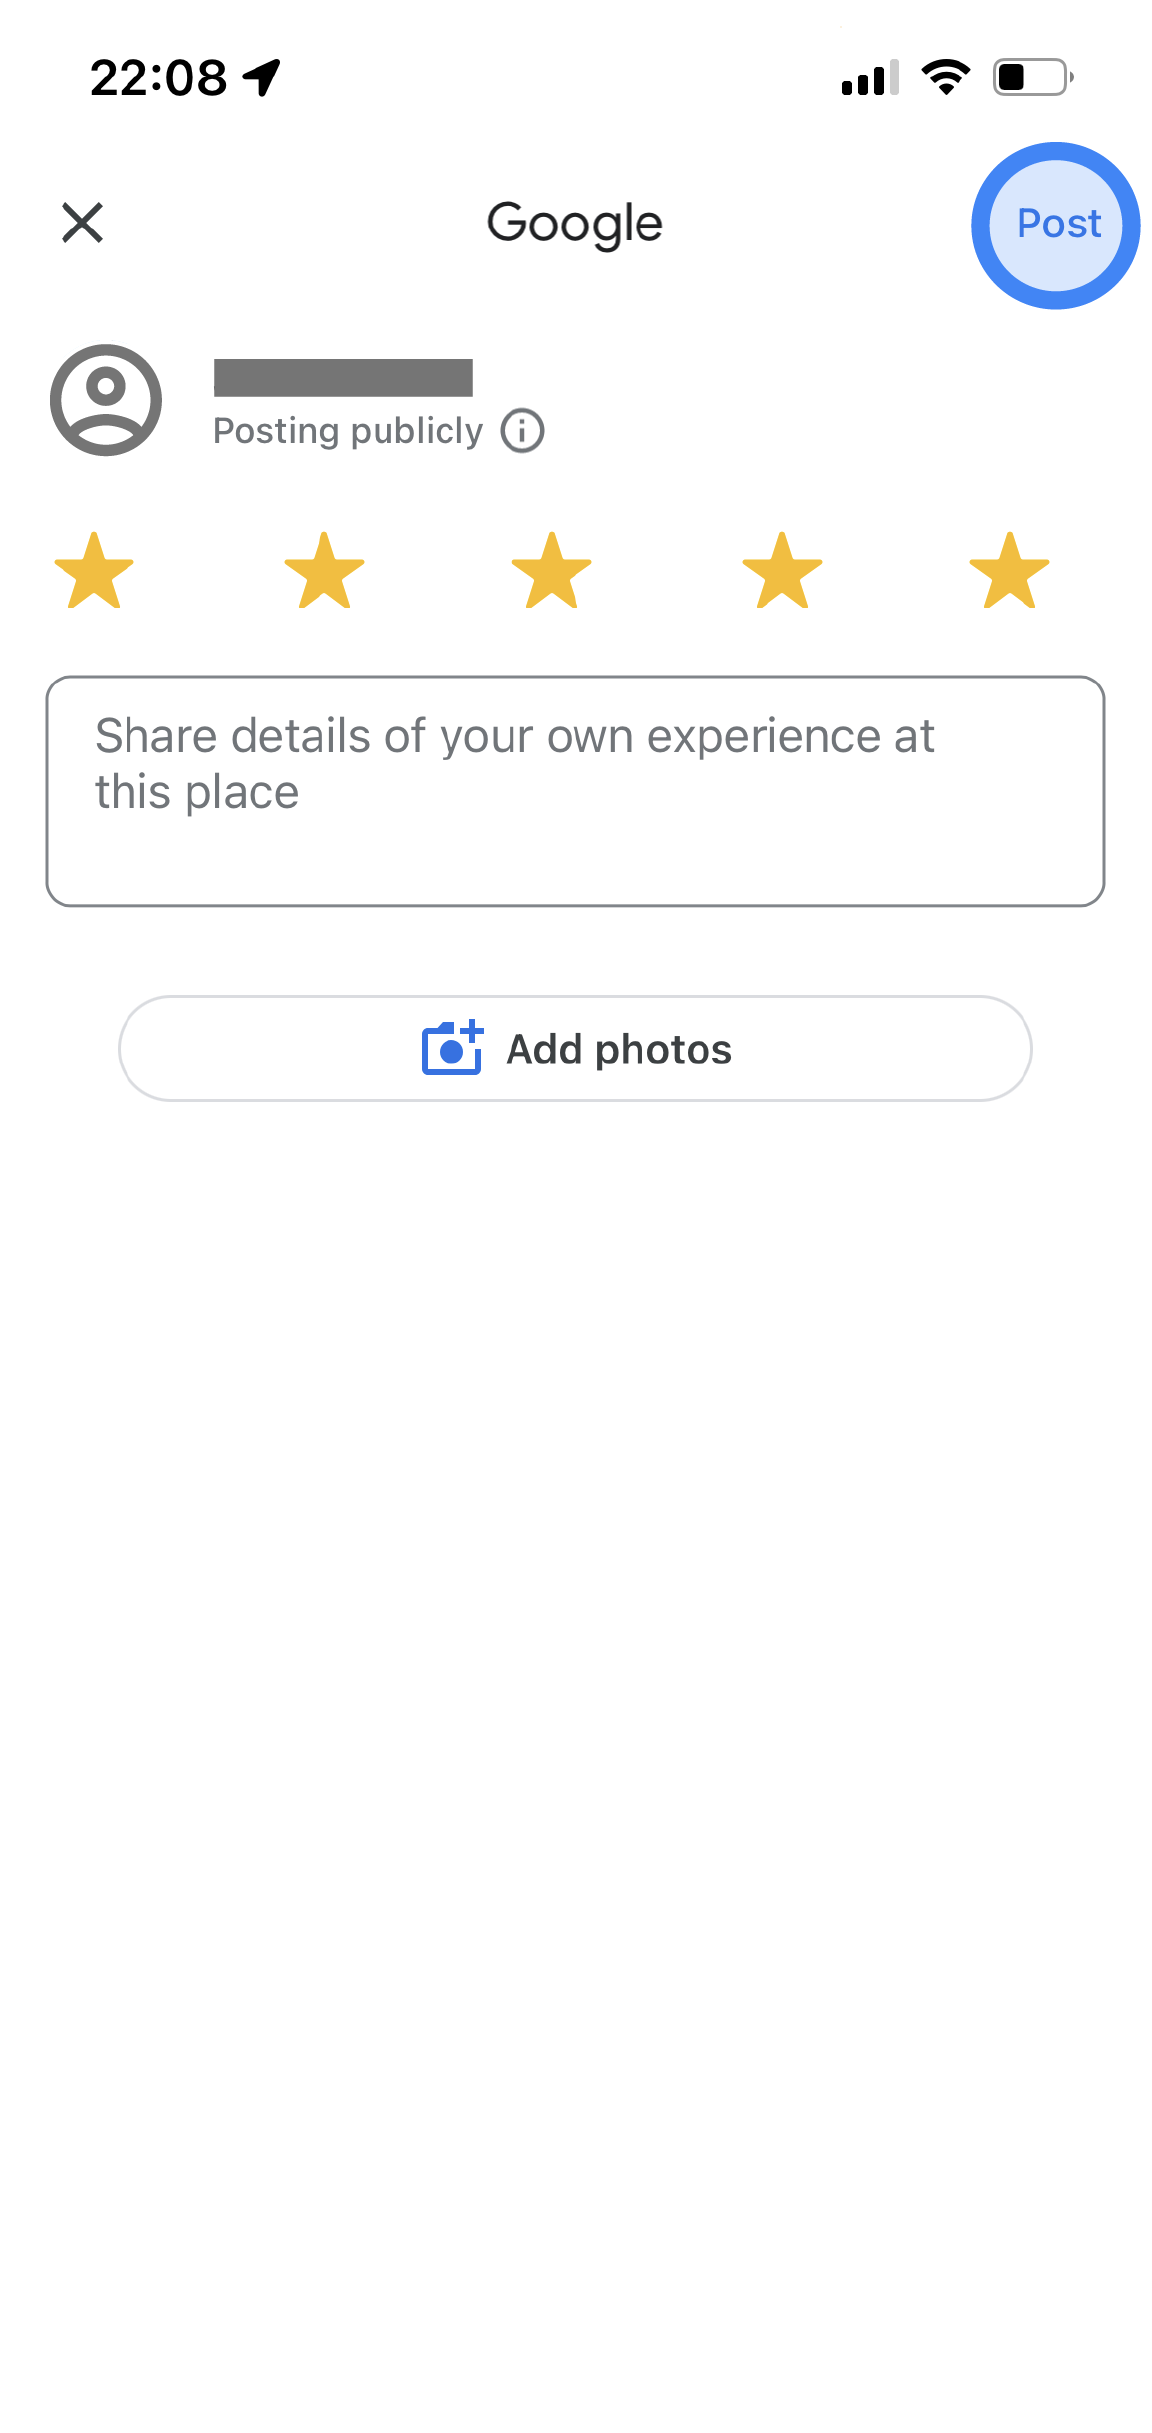 In the Google Maps app, a rating and review page is shown. The icon of a user is at the top with a note that says "Posting publicly." Five stars are selected and there is a text box to enter additional review details. At the bottom, there is a button that says "Add photos."